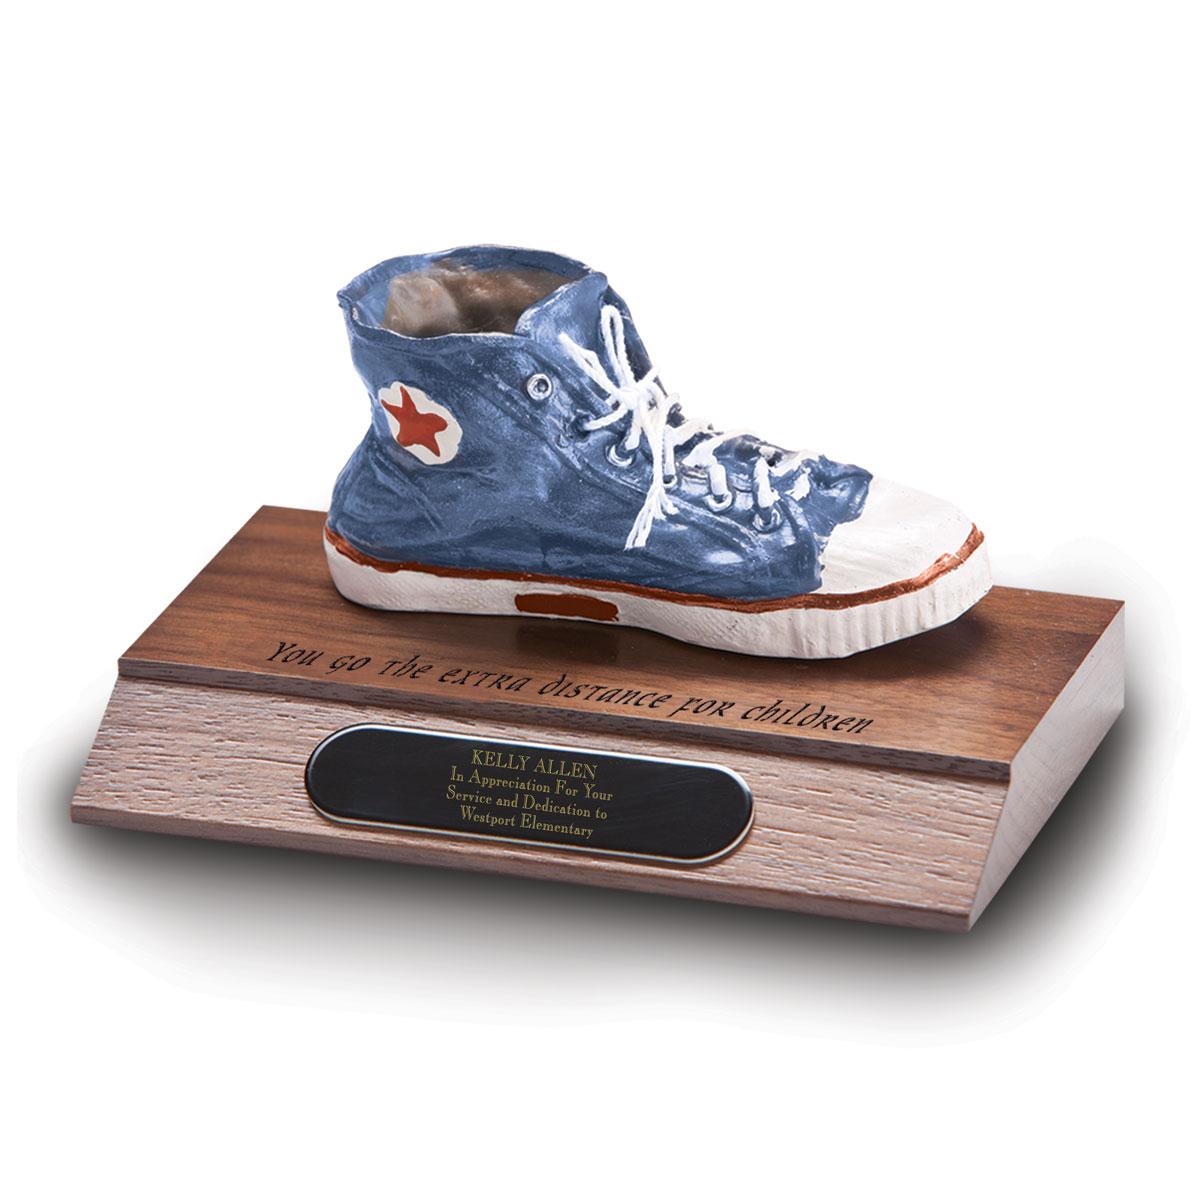 base award with blue sneaker and extra distance message